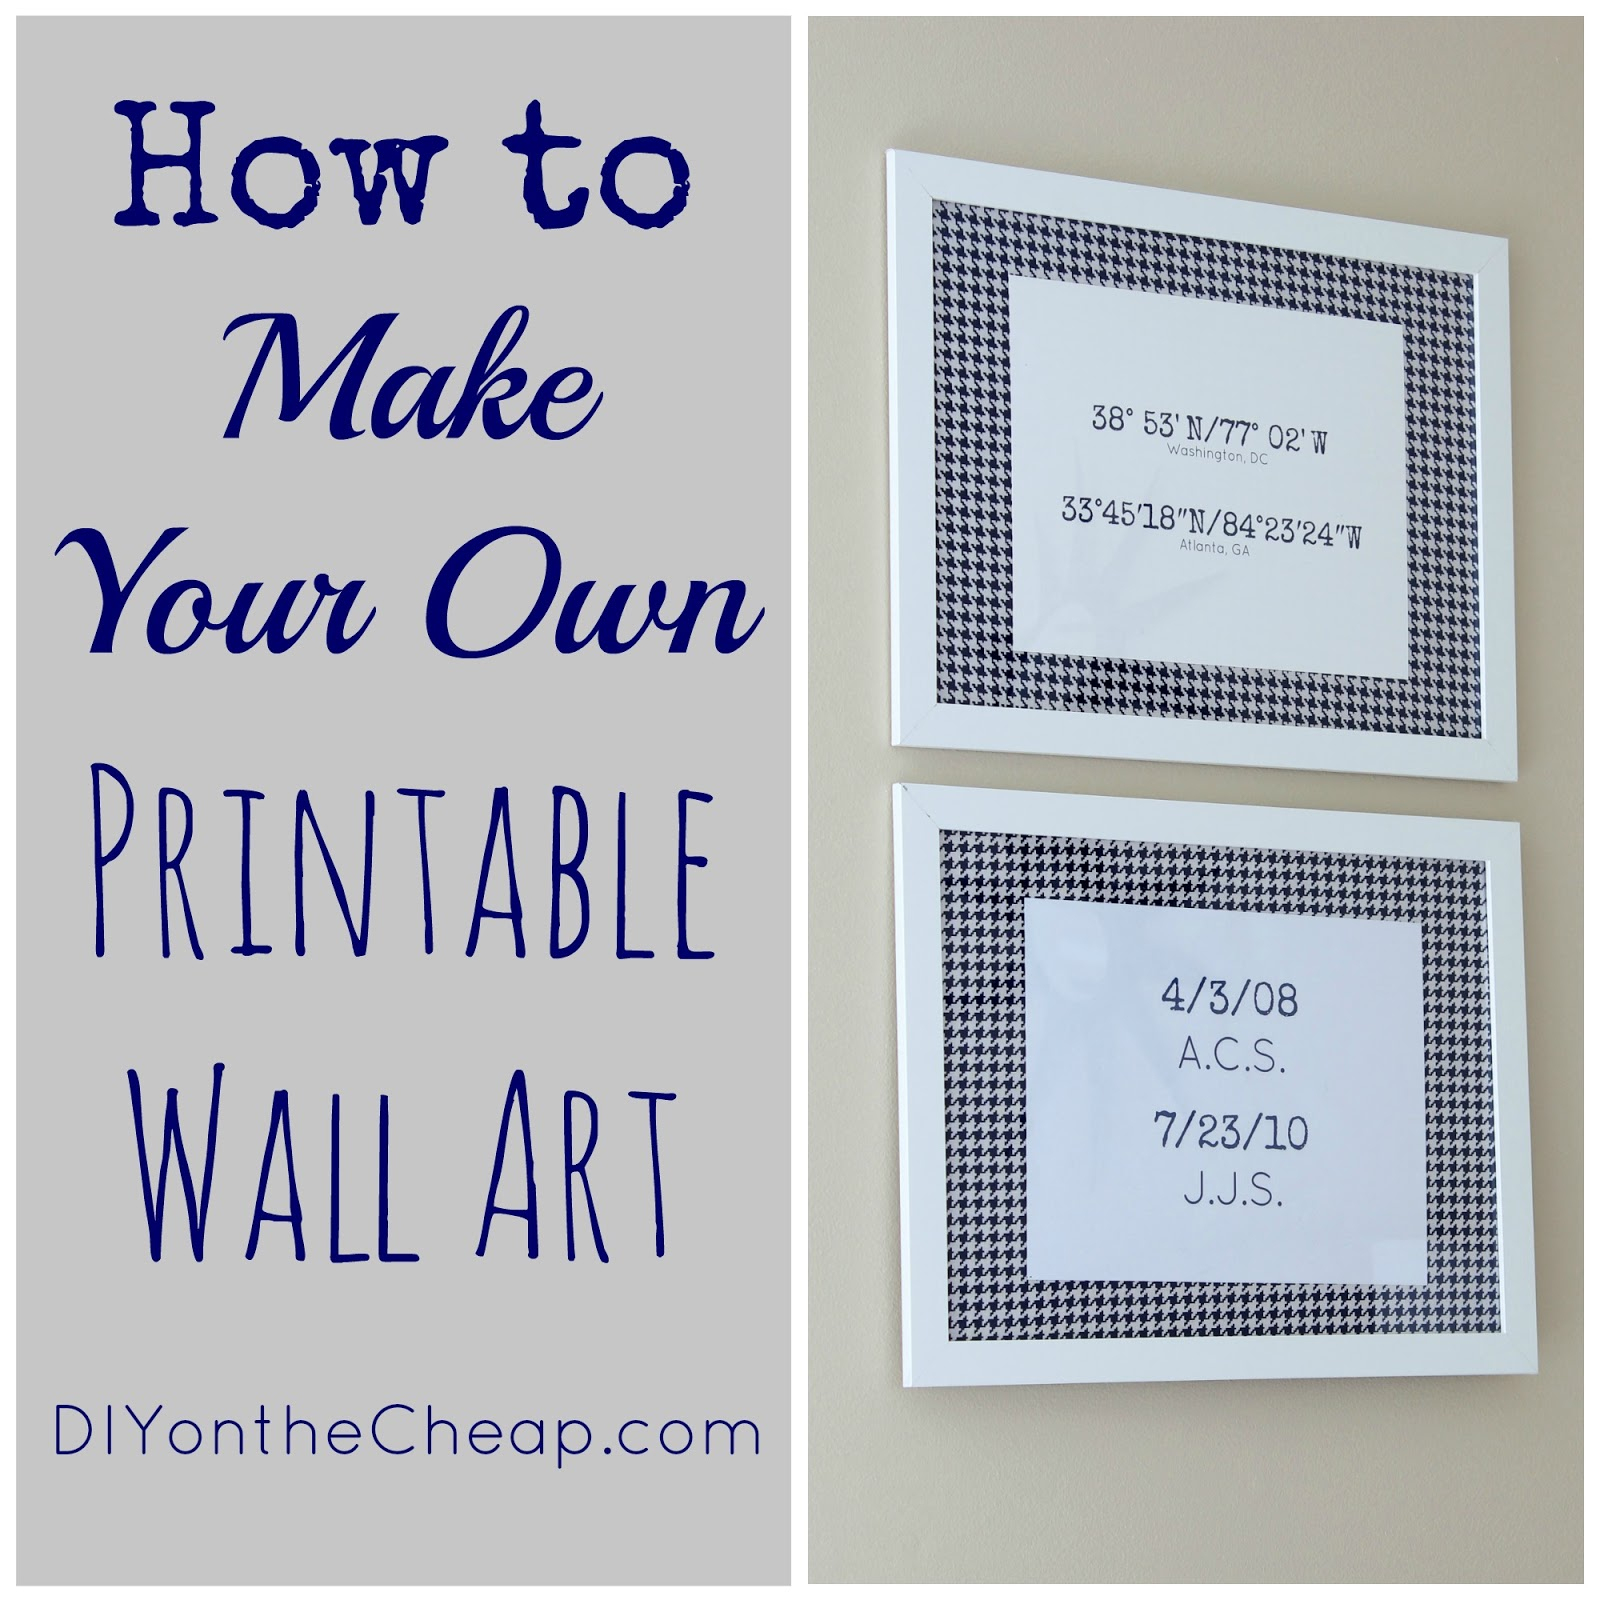 How To Make Your Own Printable Wall Art - Erin Spain - Make Your Own Tickets Free Printable